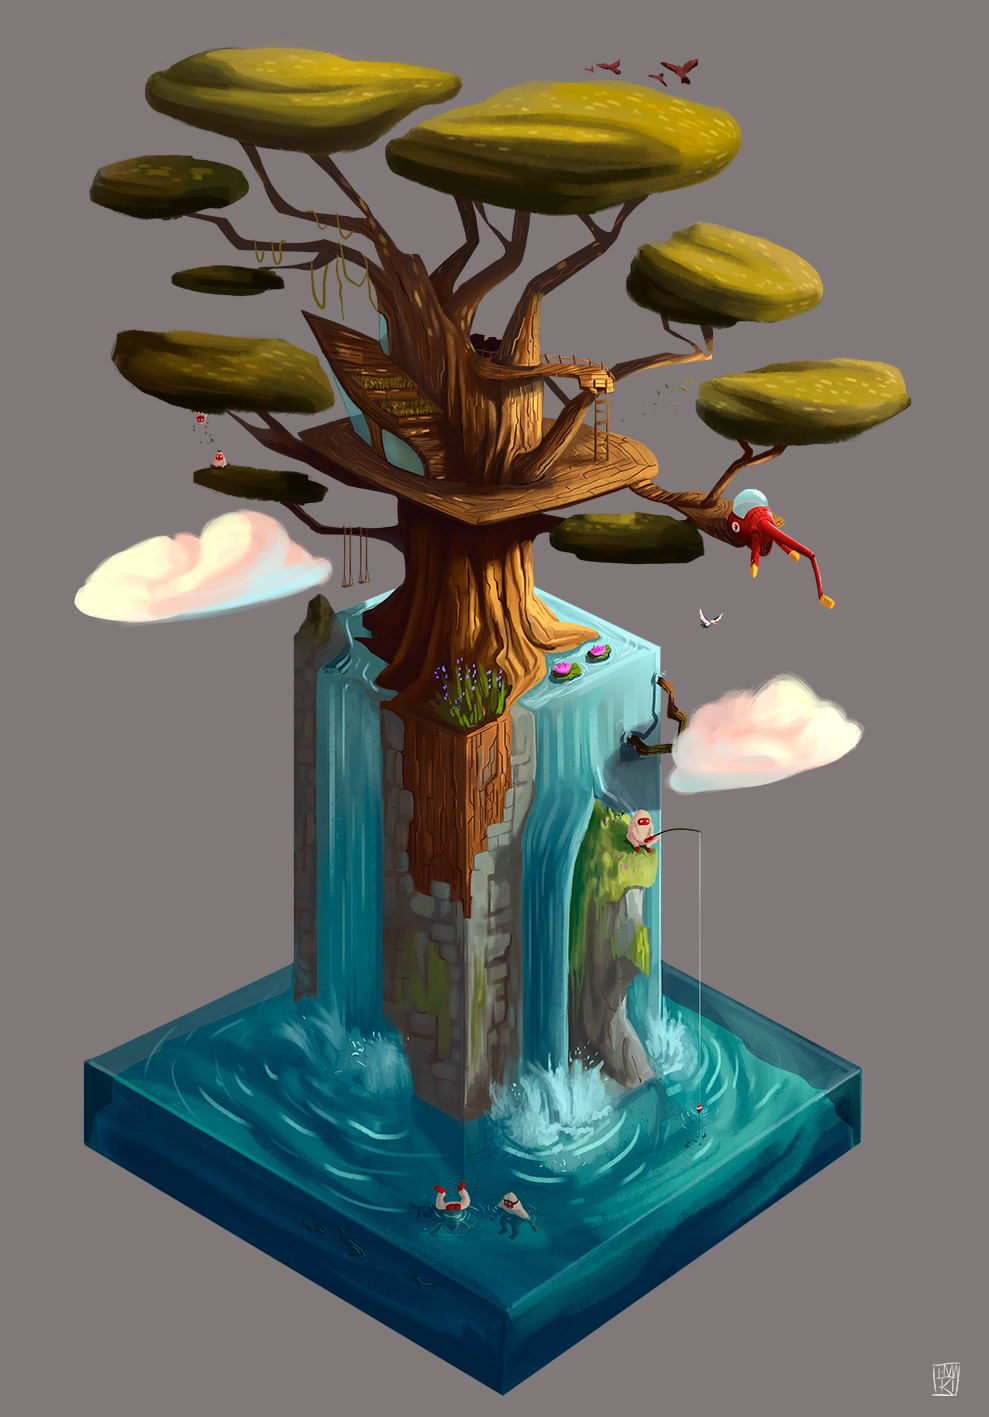 conceptart concept Island lostisland pirate Treehouse mountain submarine sous marin ile video-games jeux-video